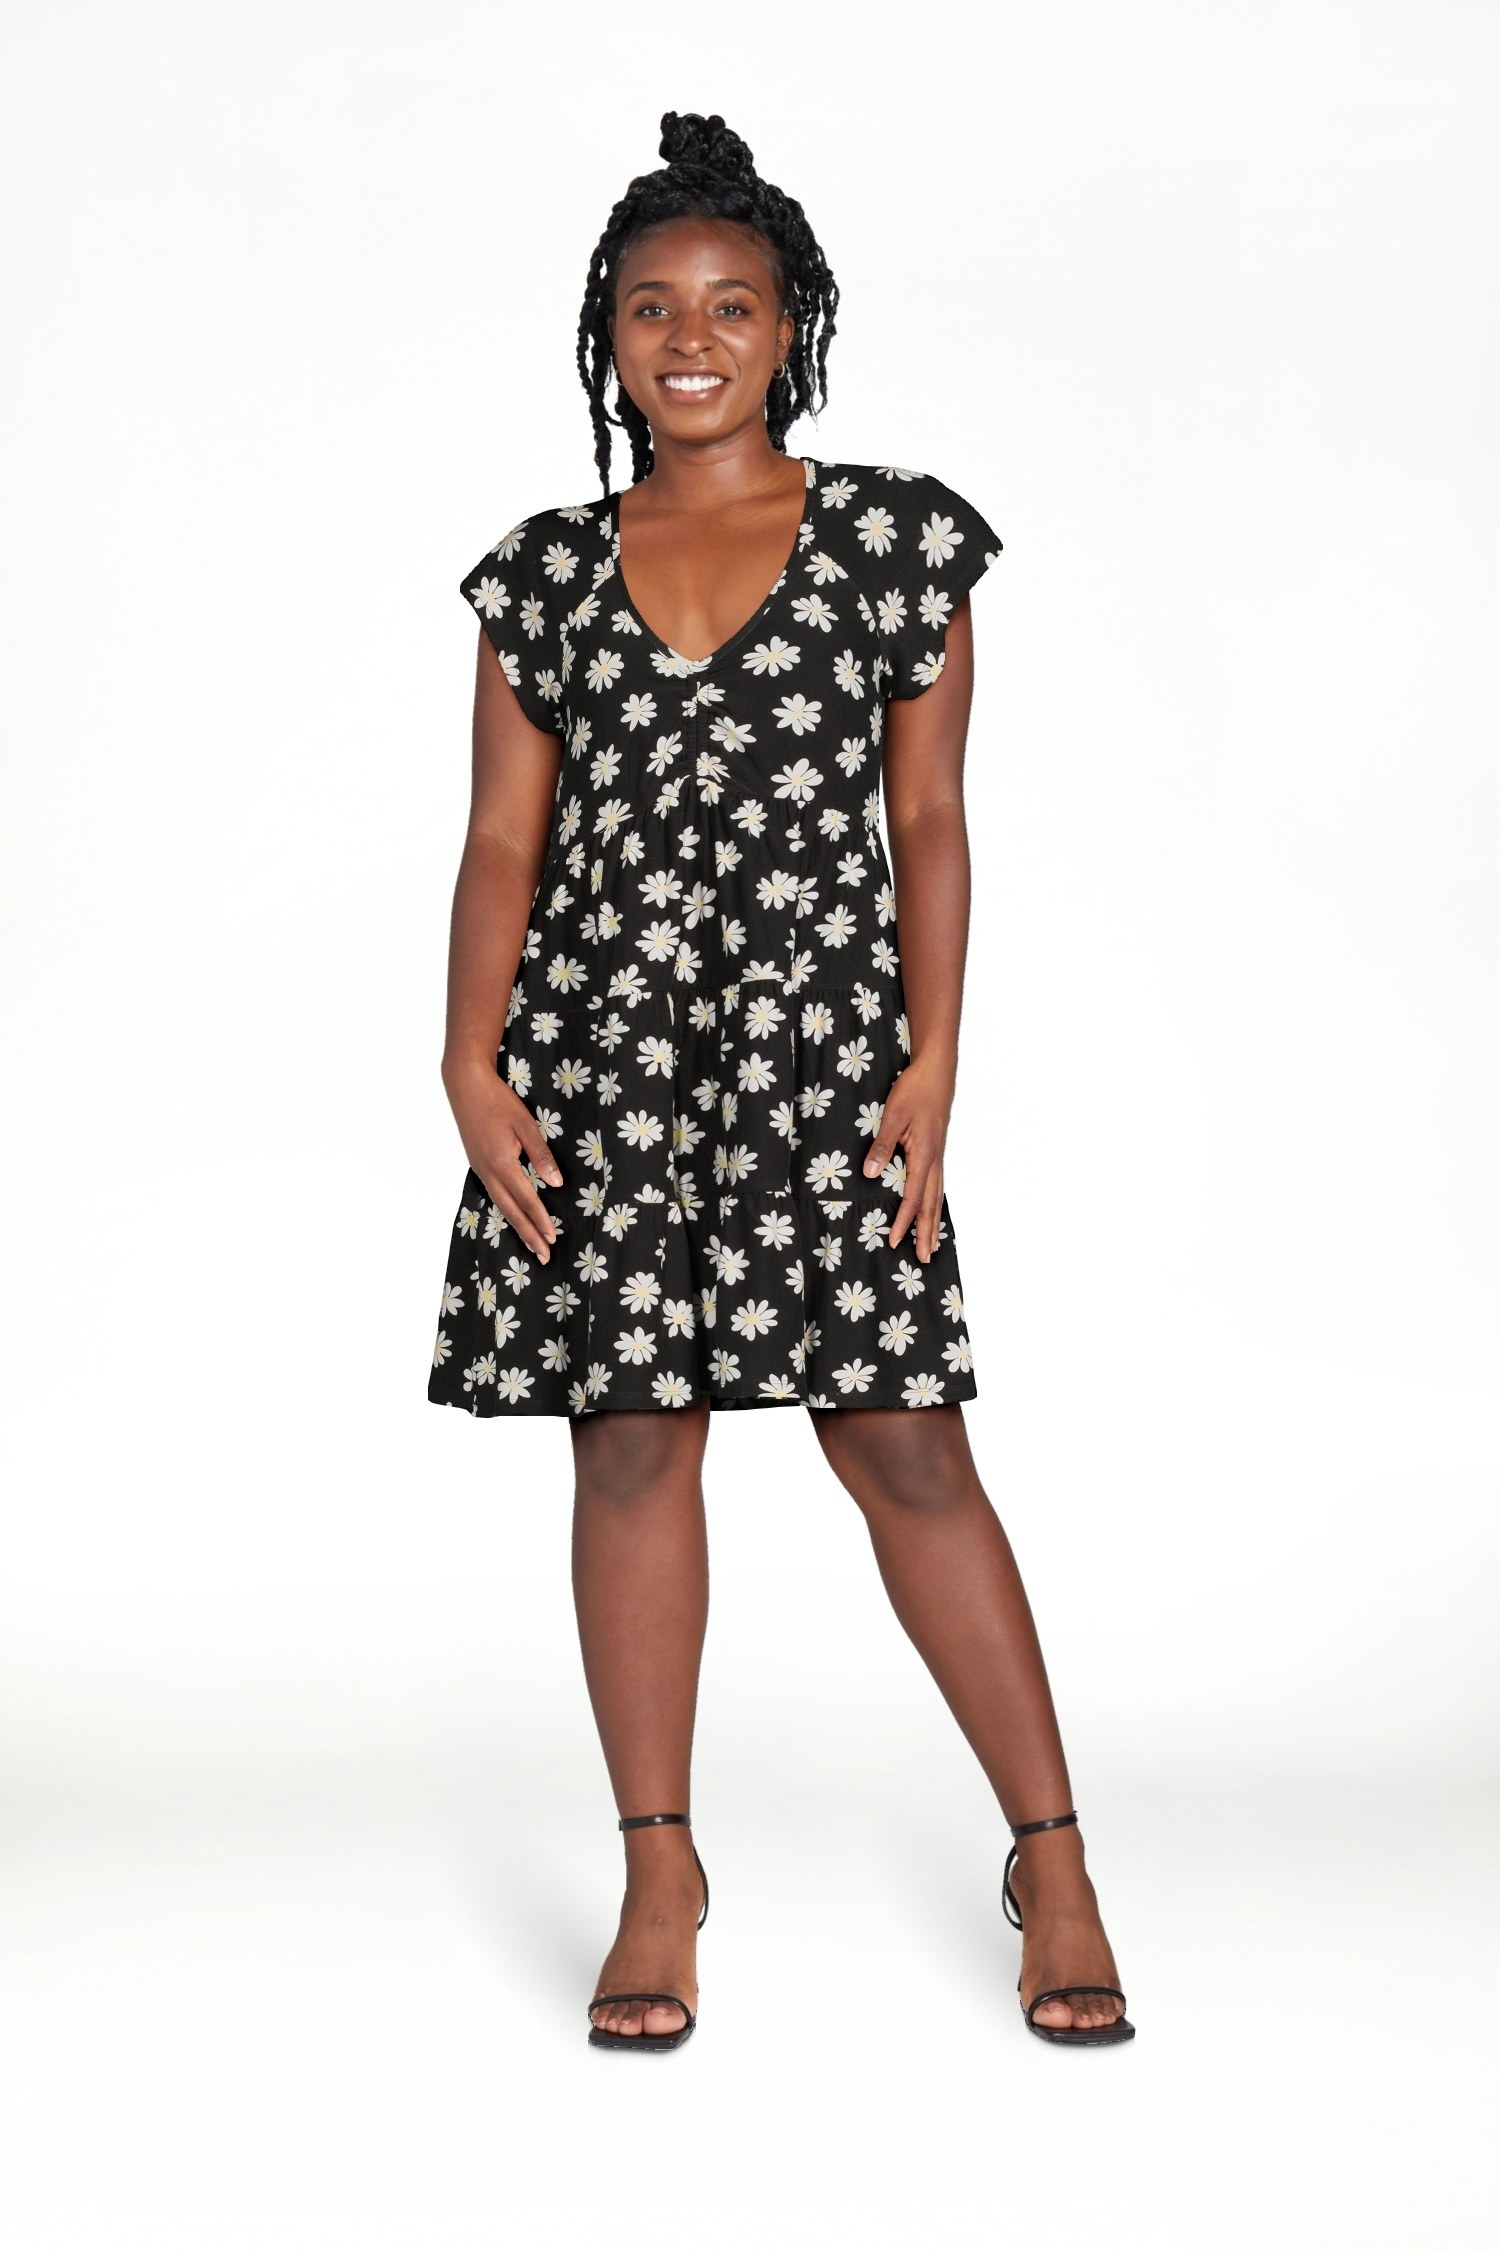 Model wearing the black soot floral dress